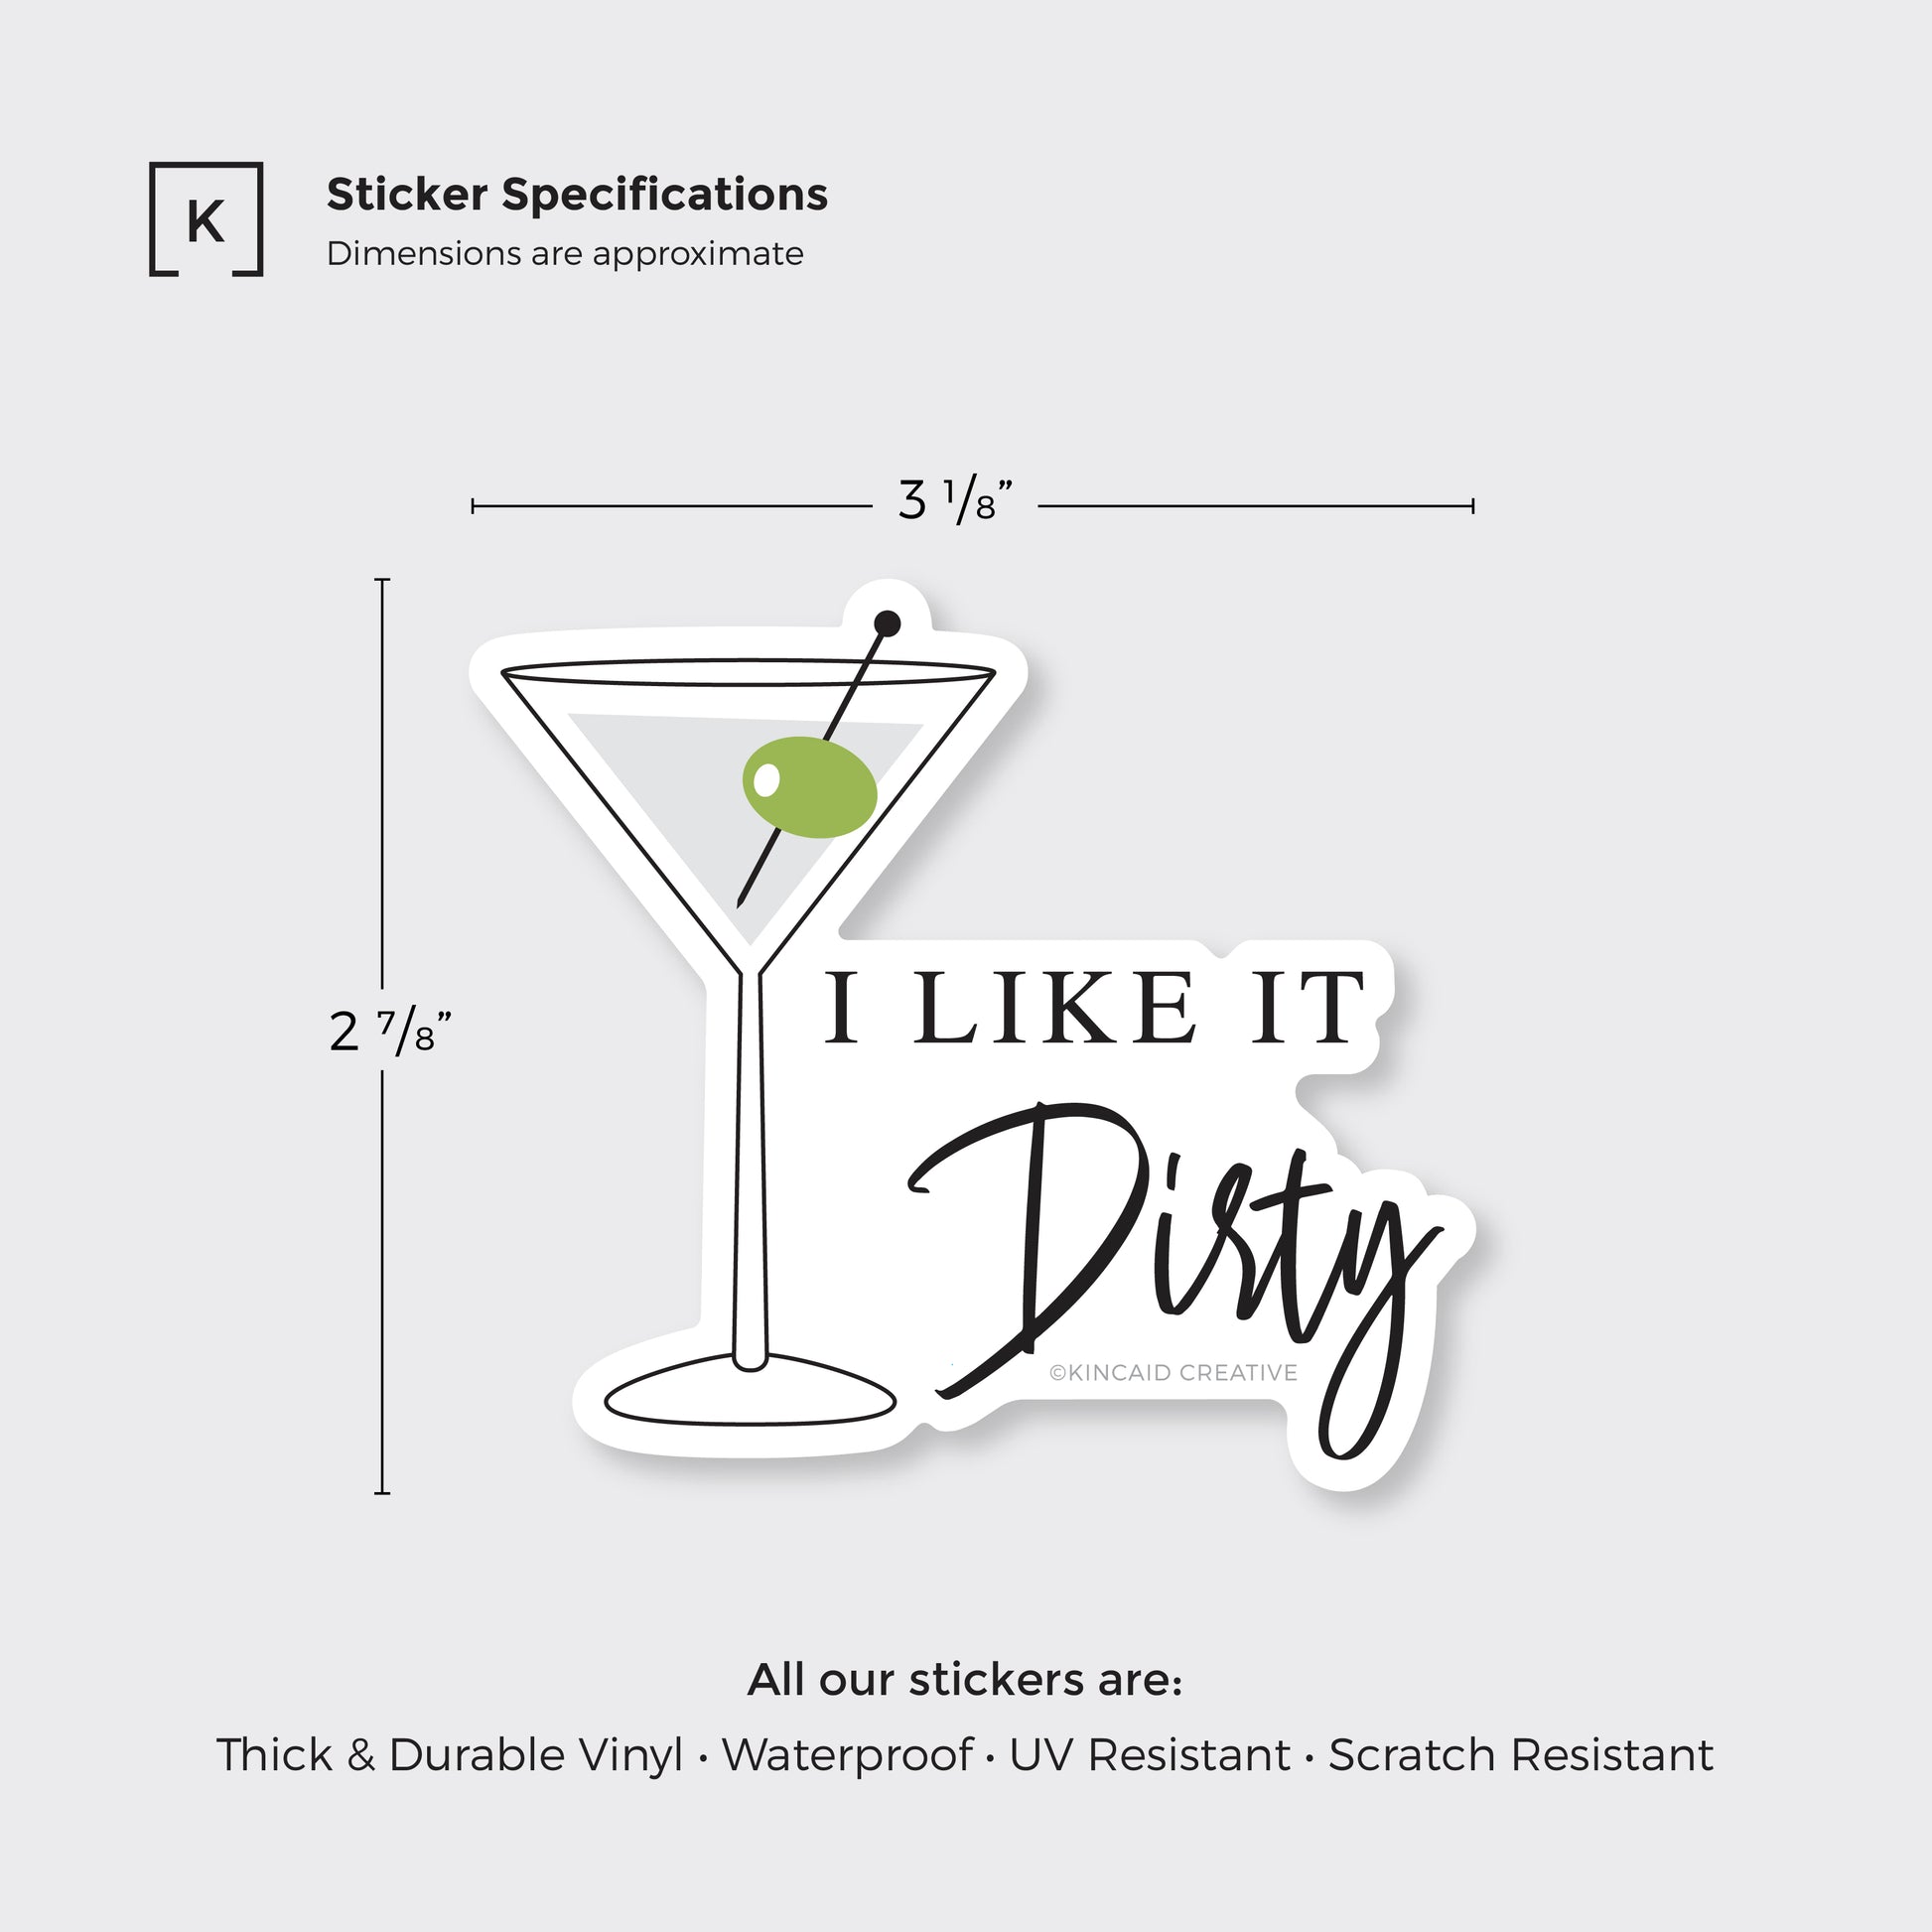 Dimensions 3.125x2.875 inches, Waterproof Vinyl Sticker, I like it dirty, martini cocktail, martini glass with cocktail and olive, All our stickers are thick and durable vinyl, waterproof, UV and scratch resistant, Kincaid Creative